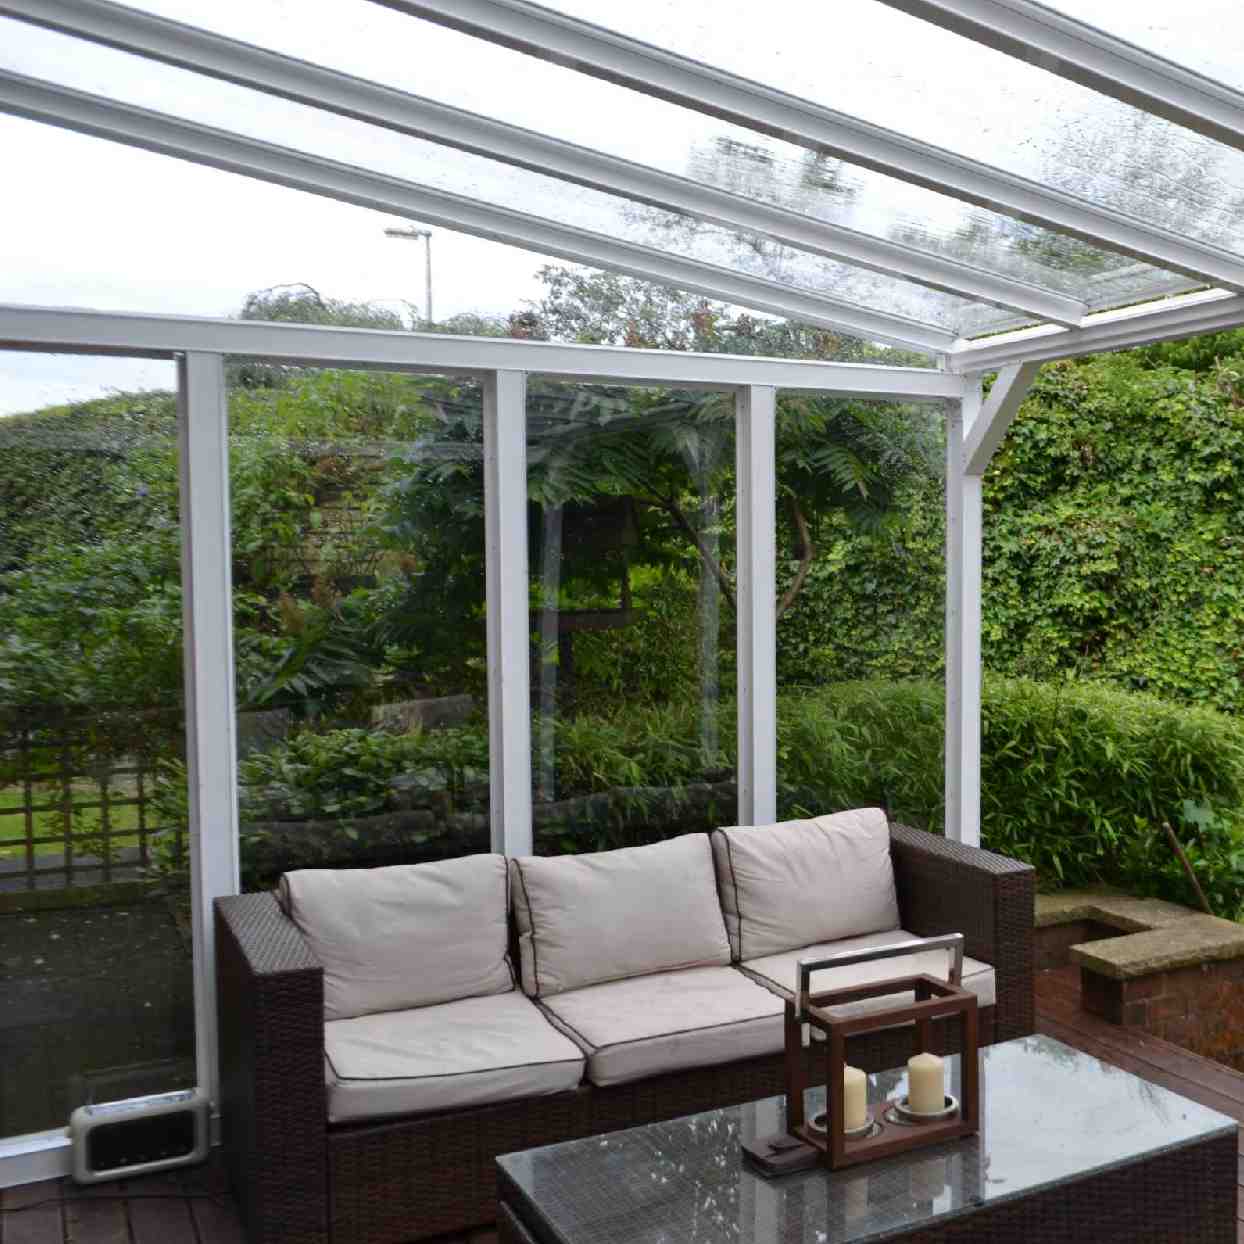 Buy Omega Verandah White with 16mm Polycarbonate Glazing - 4.9m (W) x 3.5m (P), (3) Supporting Posts online today